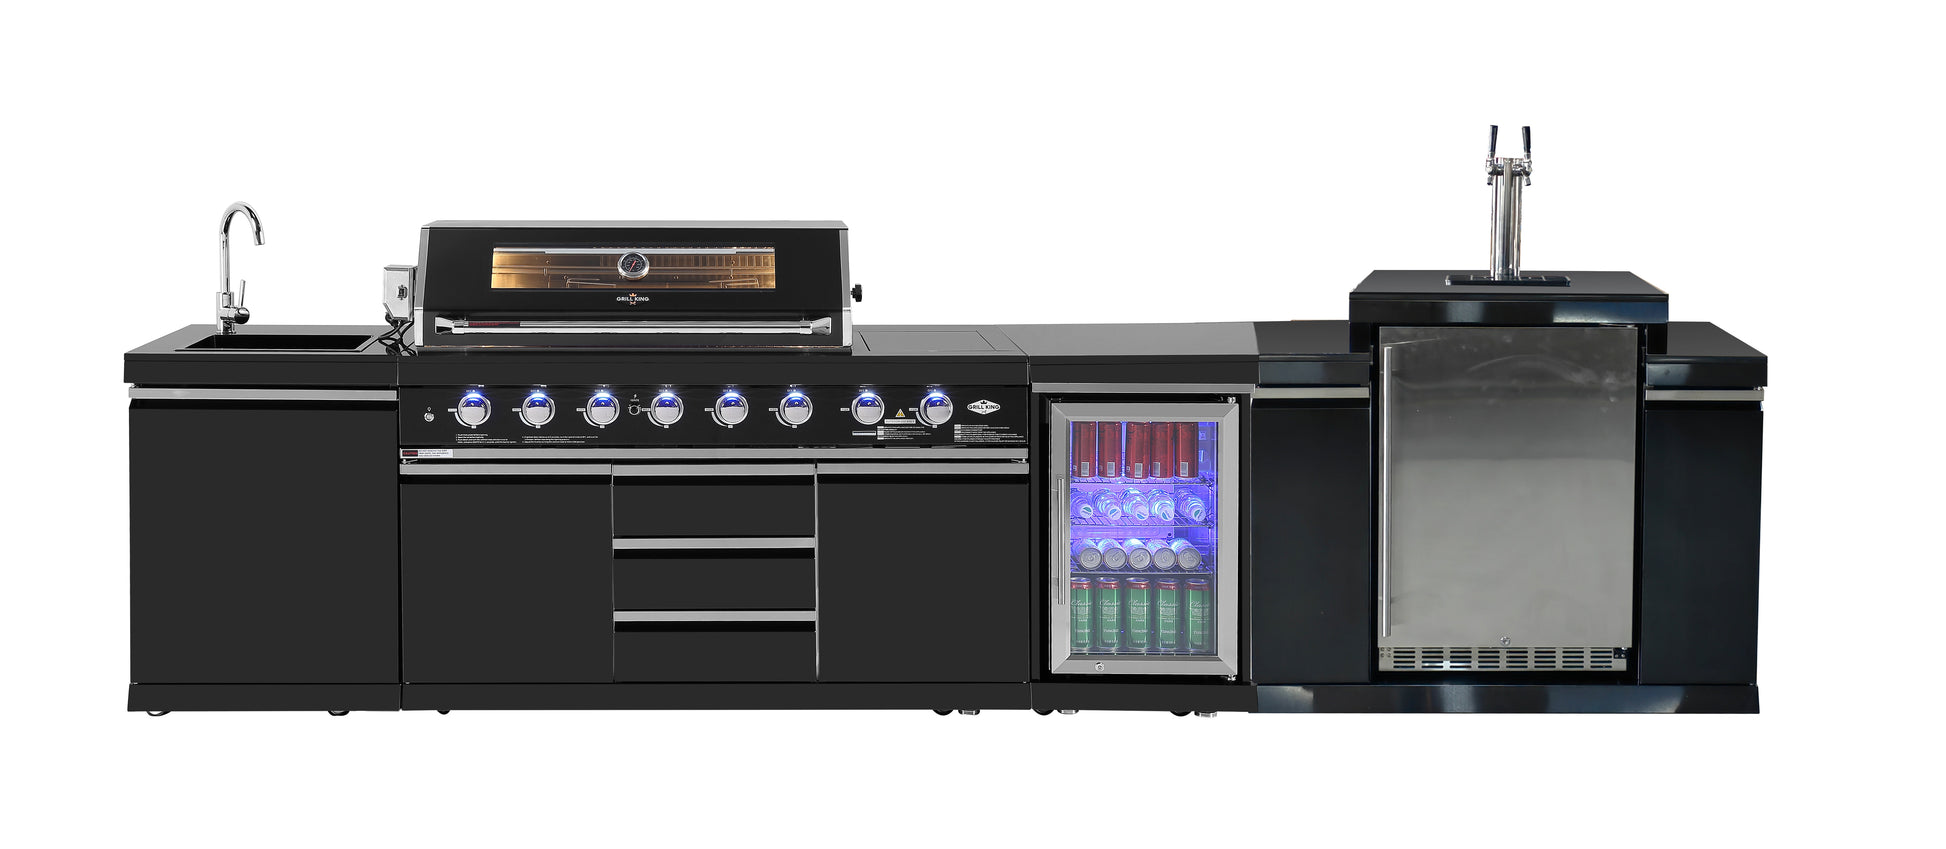 Kingsley 6-Burner Outdoor BBQ Kitchen + 118L Kegerator : Black Stainless Steel, Stone Bench, Fridge, Sink, Height Adjustable, Rotisserie with BBQ Cover